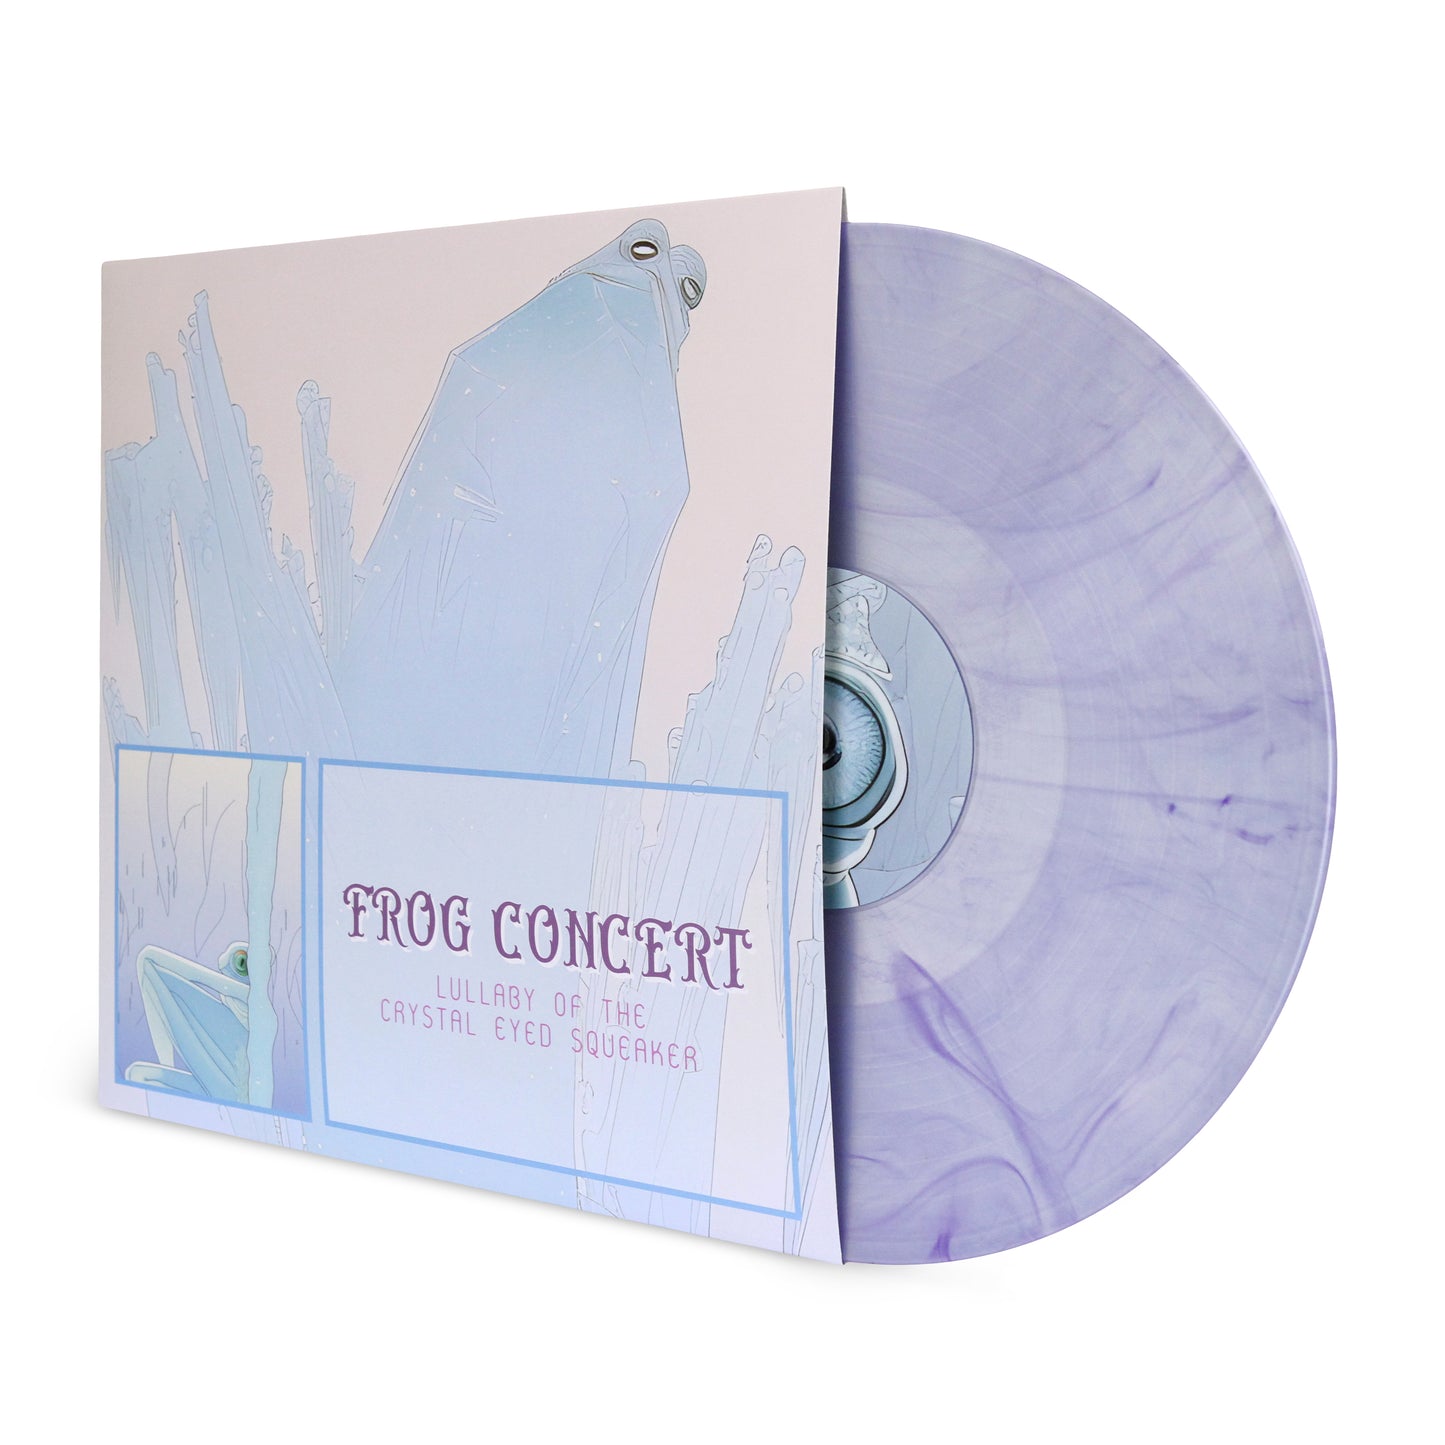 FROG CONCERT - Lullaby of the Crystal Eyed Squeaker LP